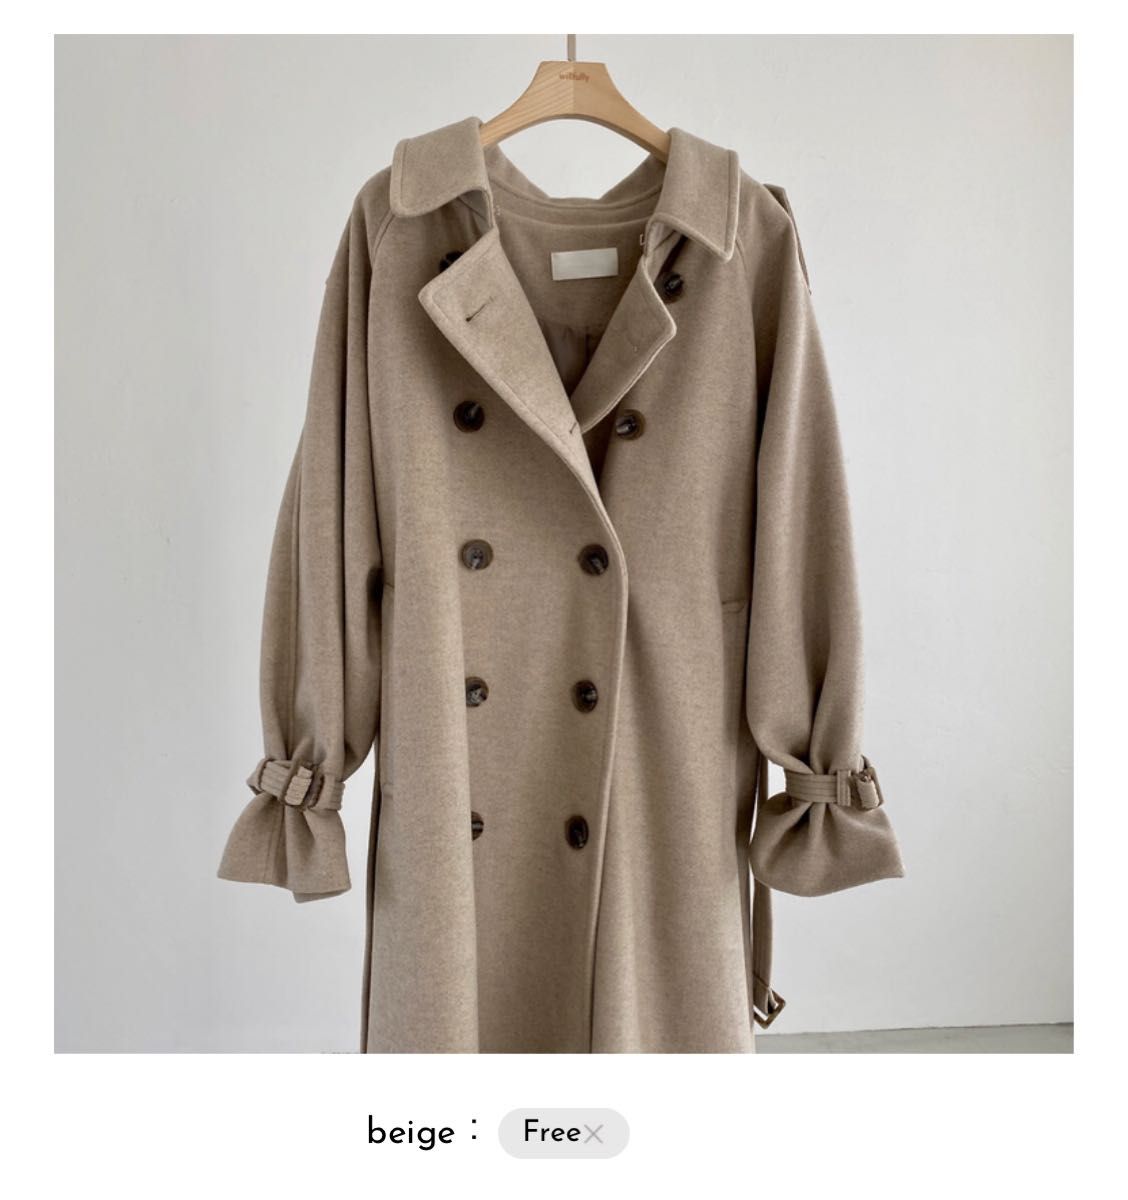 willfully jersey melton trench long coat ロング丈｜PayPayフリマ